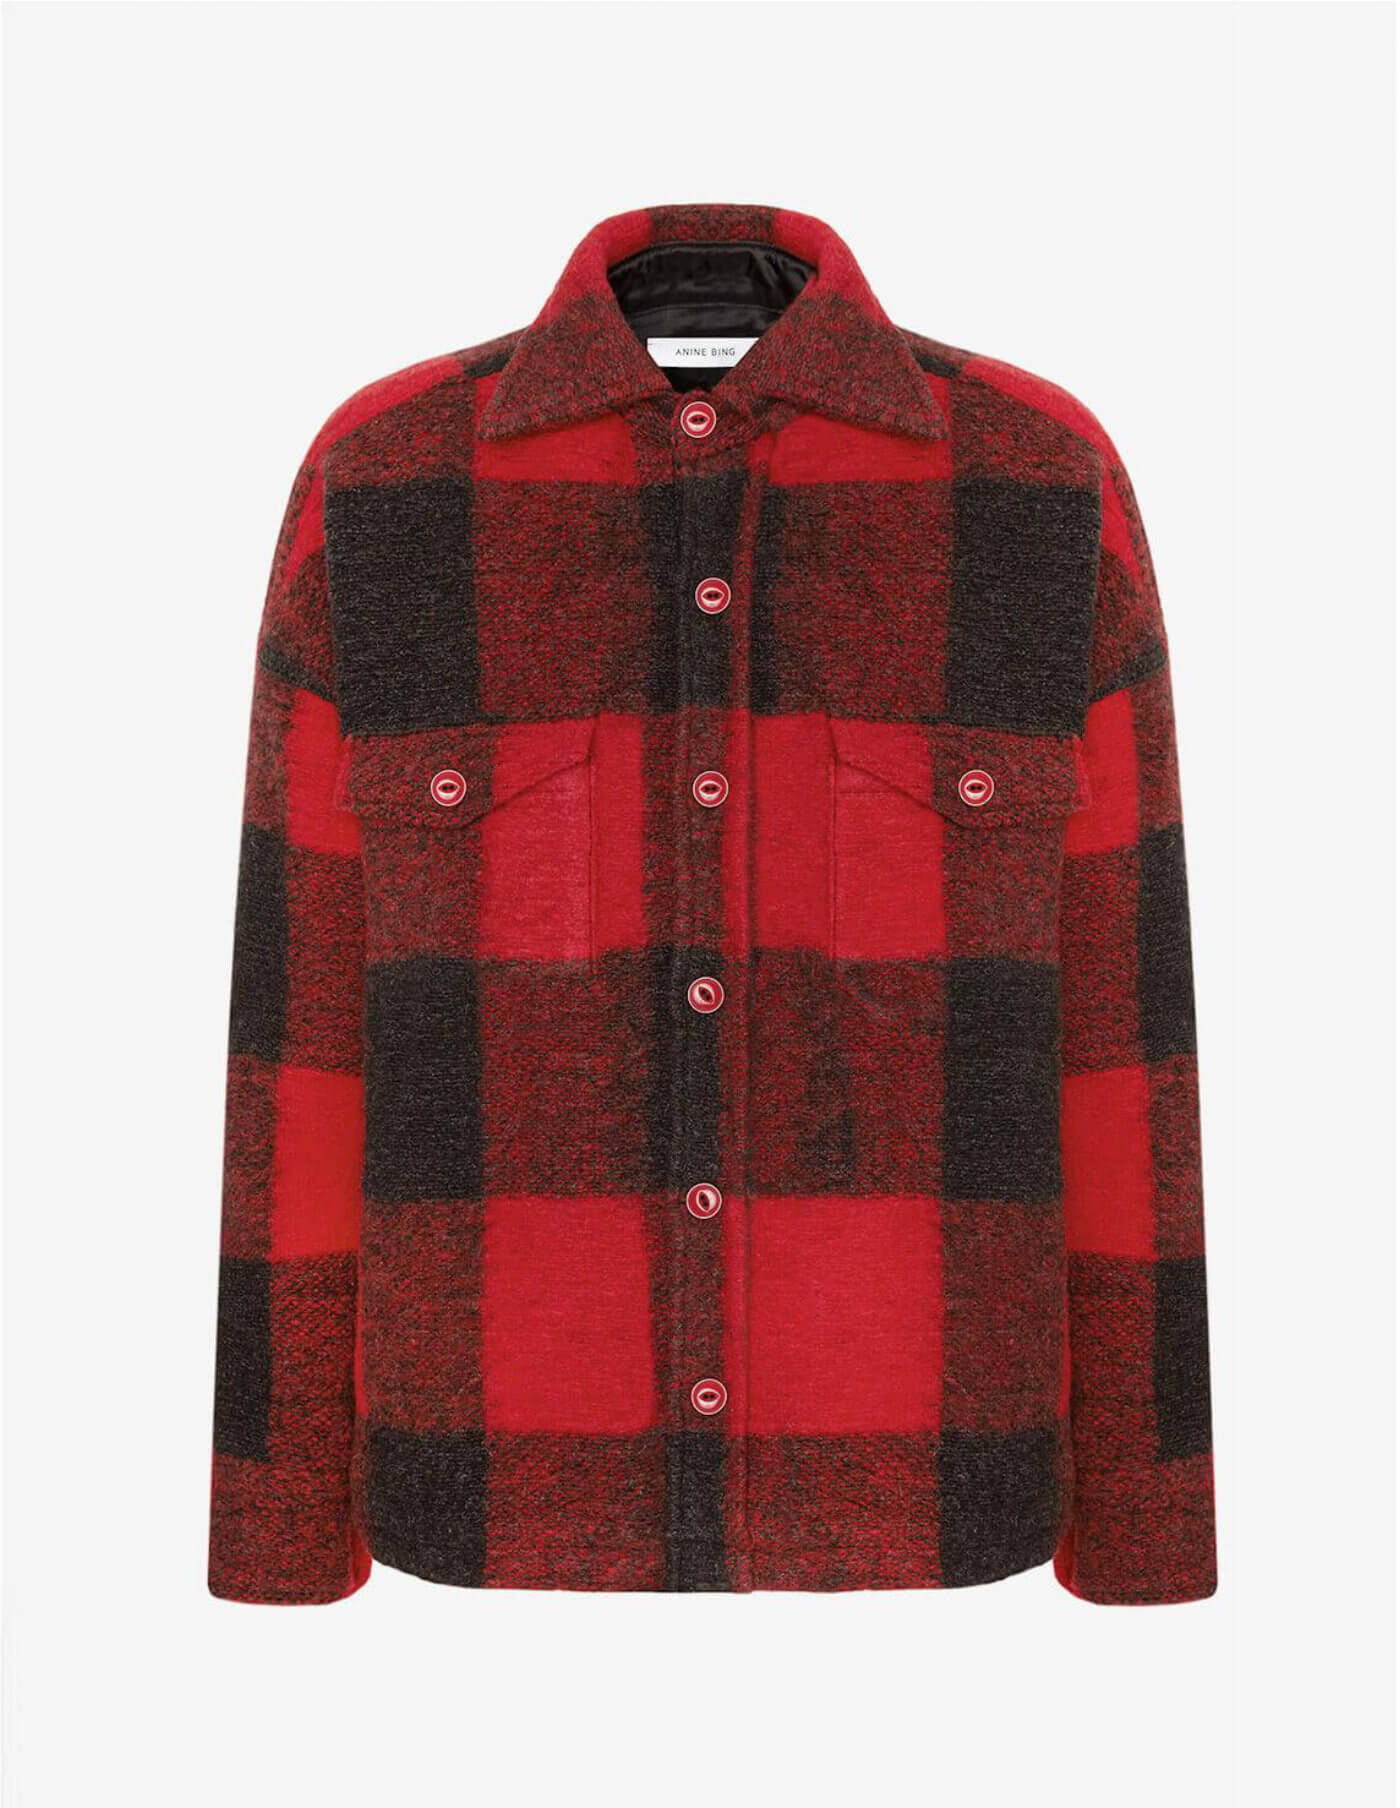 Anine Bing Bobbi Flannel Jacket In Red at Storm Fashion